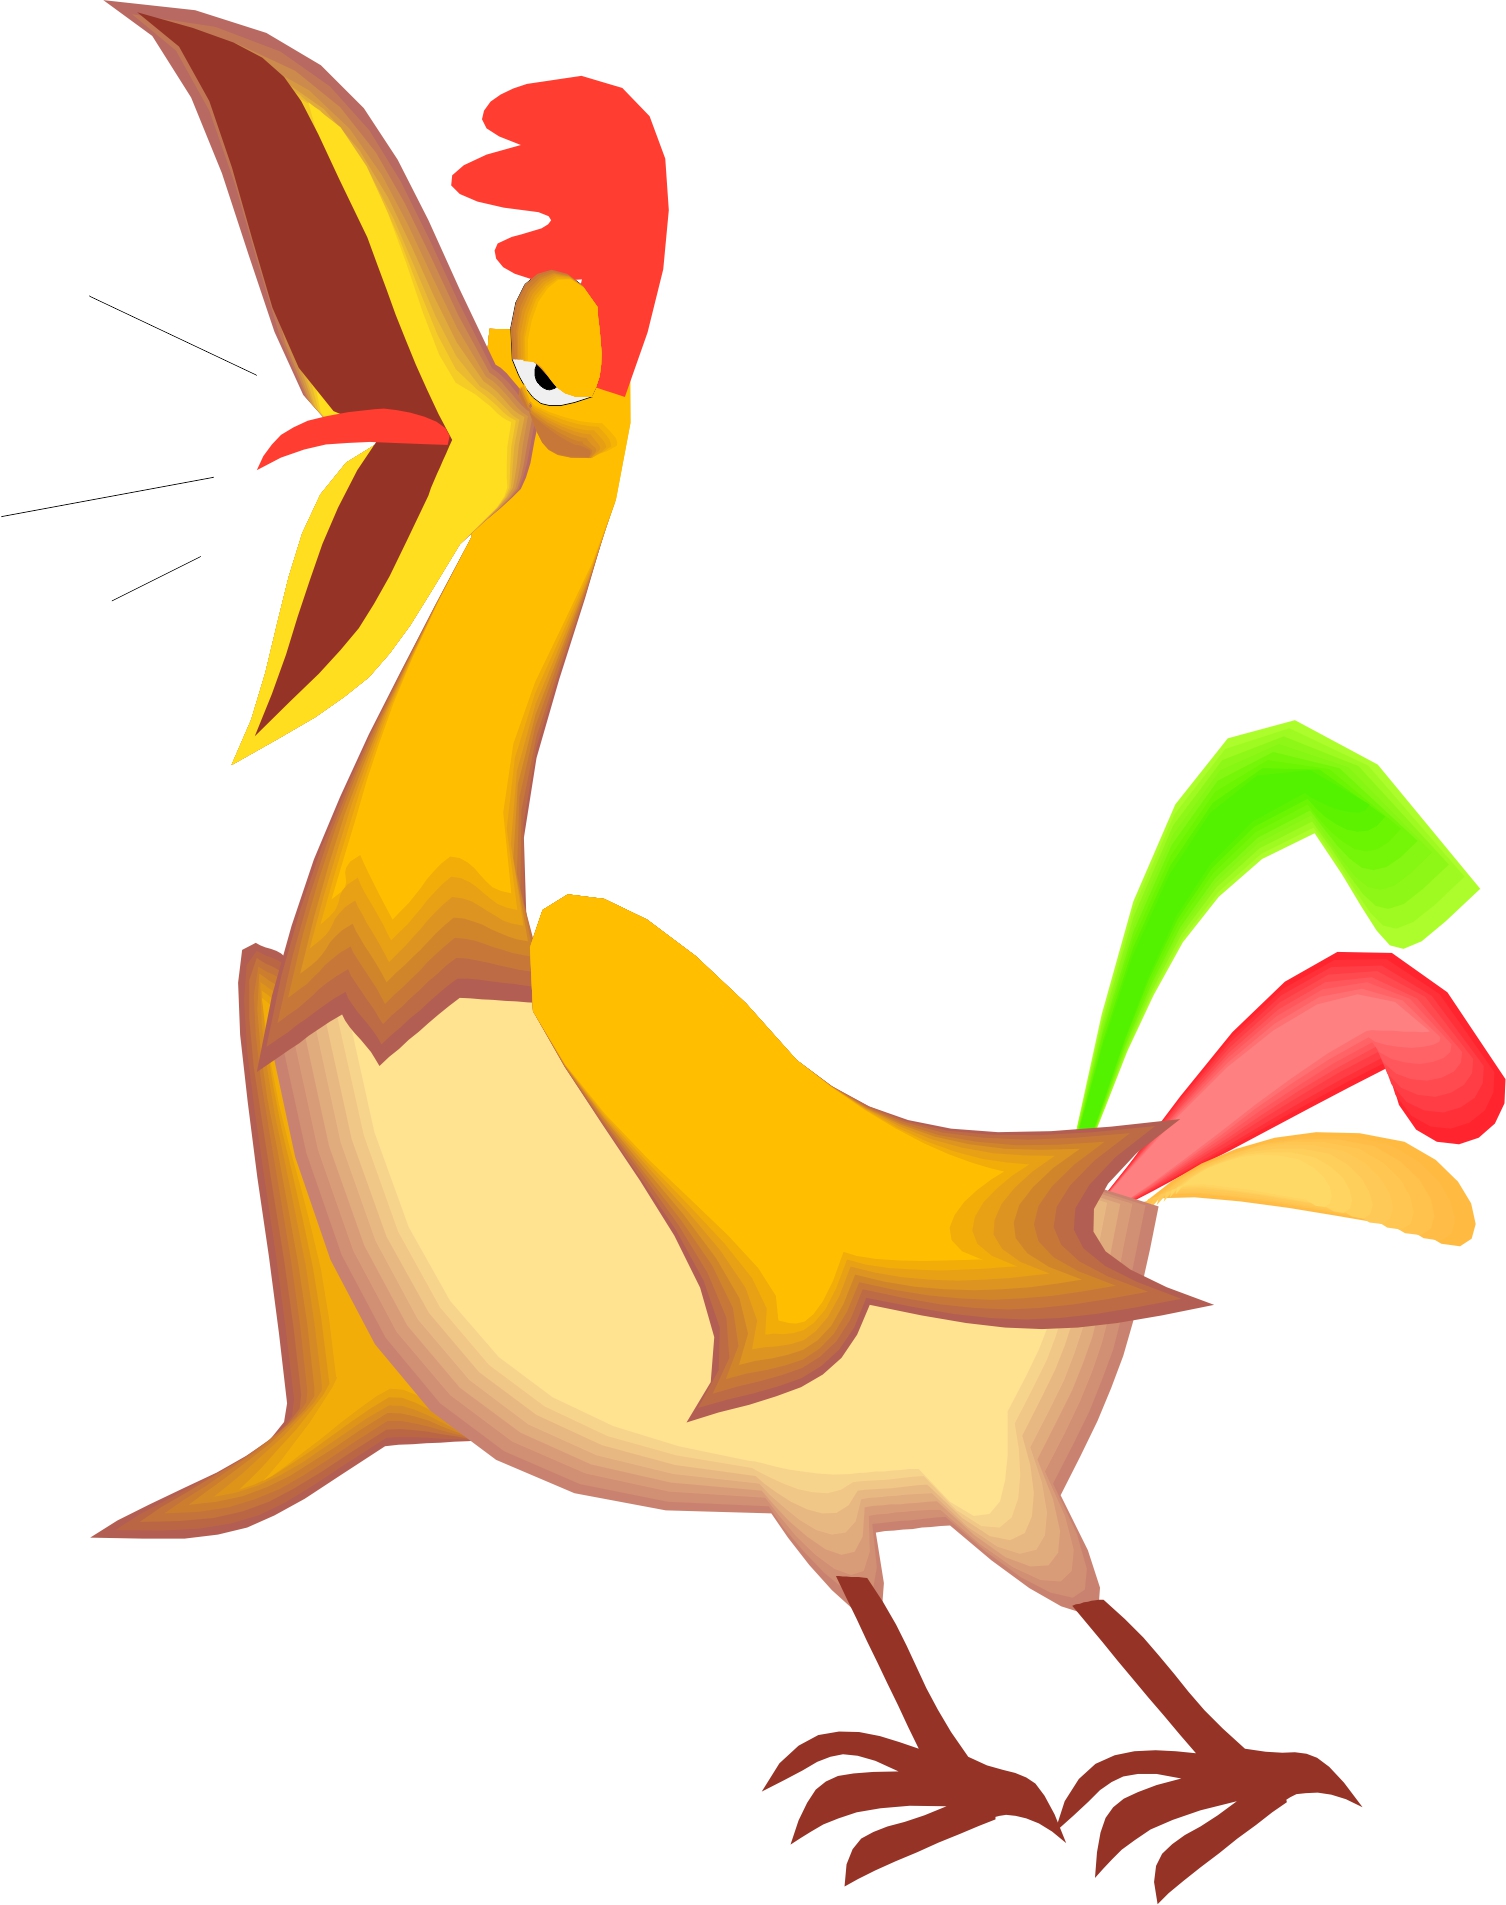 Rooster Cartoon Images | Free Download Clip Art | Free Clip Art ...